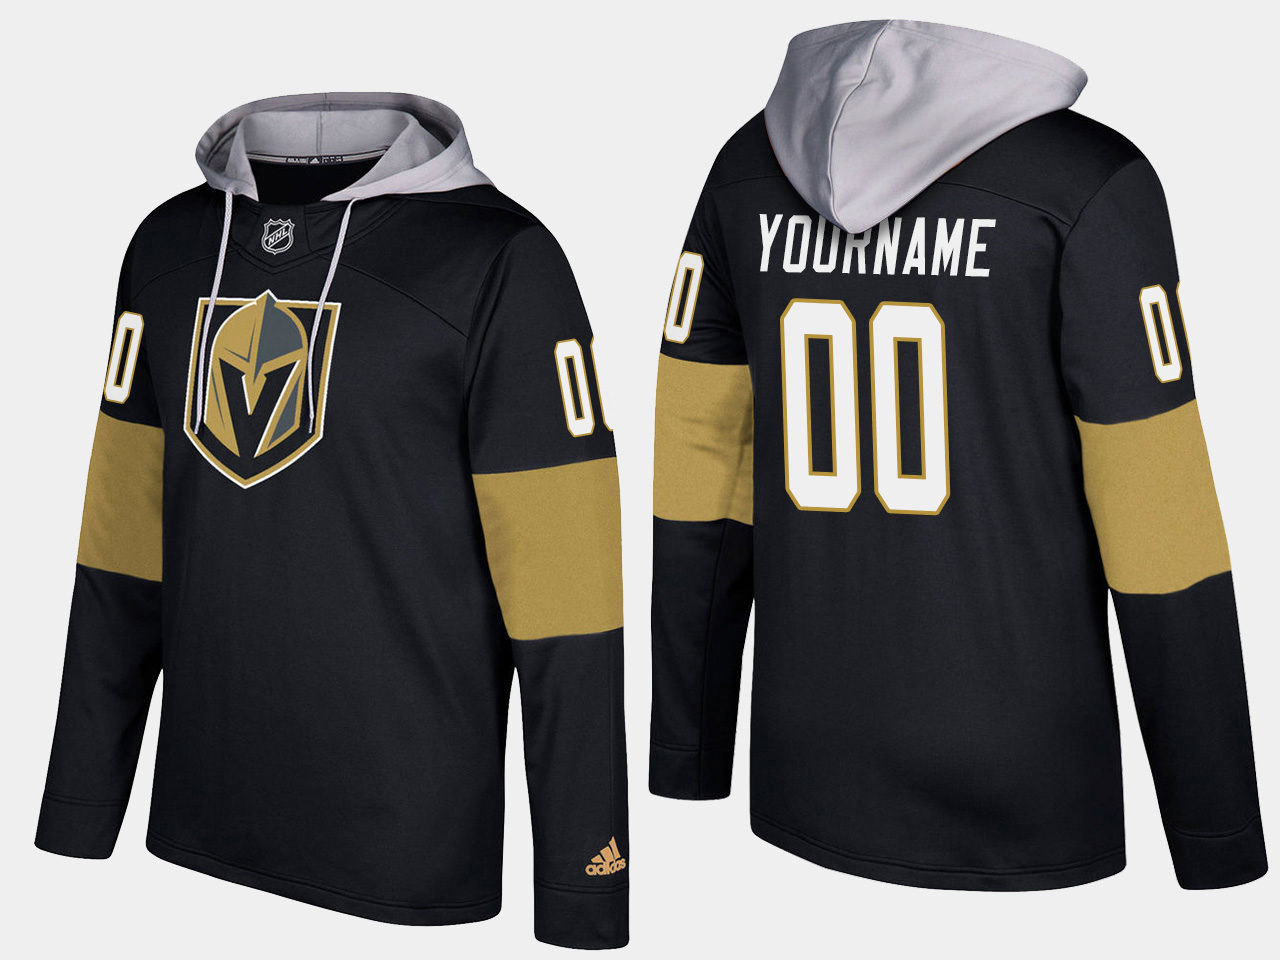 Nike Vegas Golden Knights Men's Customized Name And Number Black Hoodie